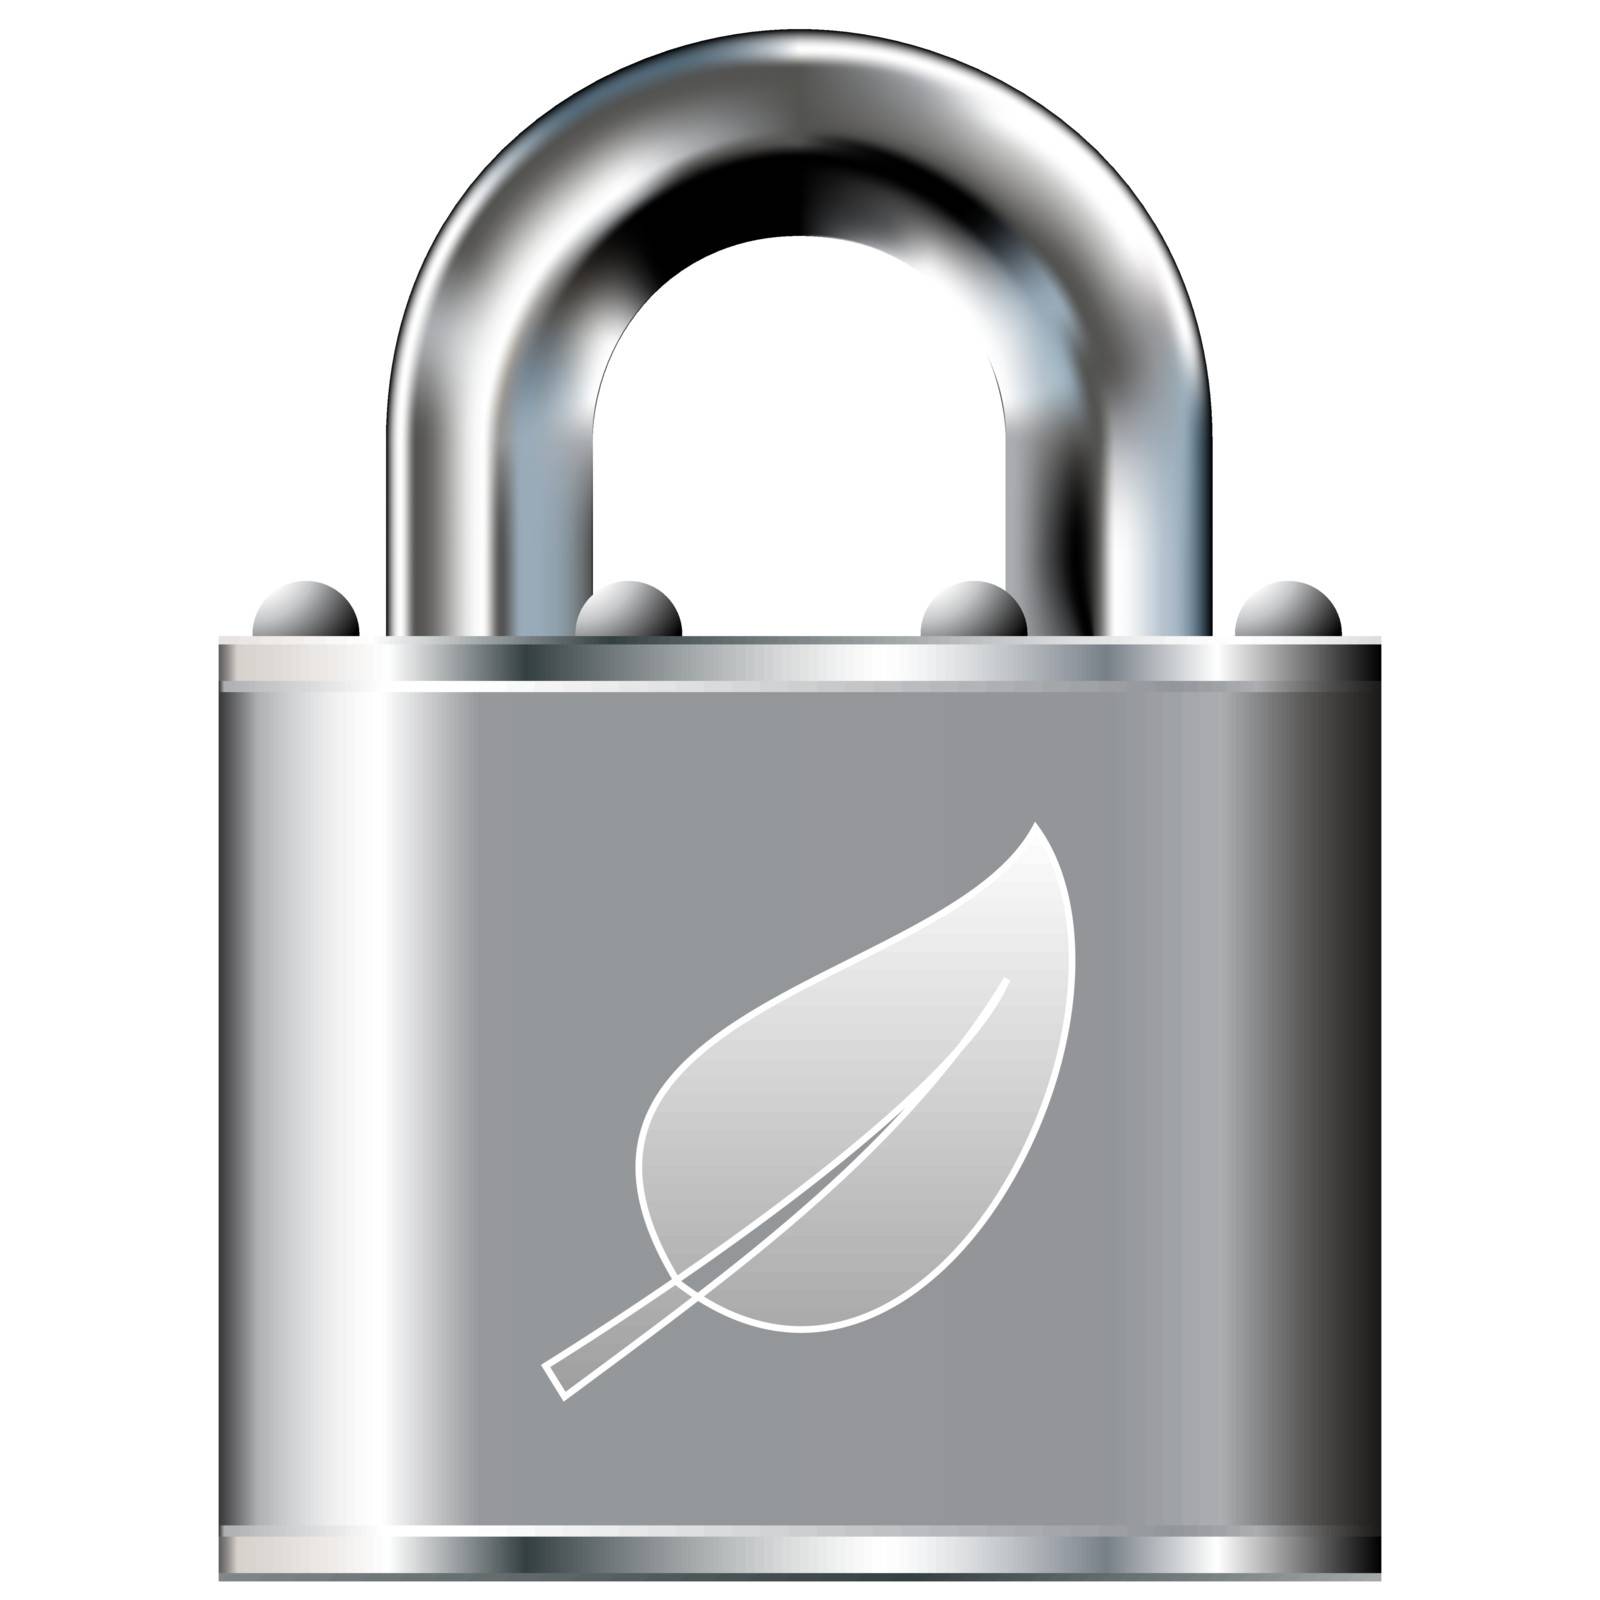 Leaf or environment icon on secure vector lock button. Suitable for use on websites, in print, and on brochures.